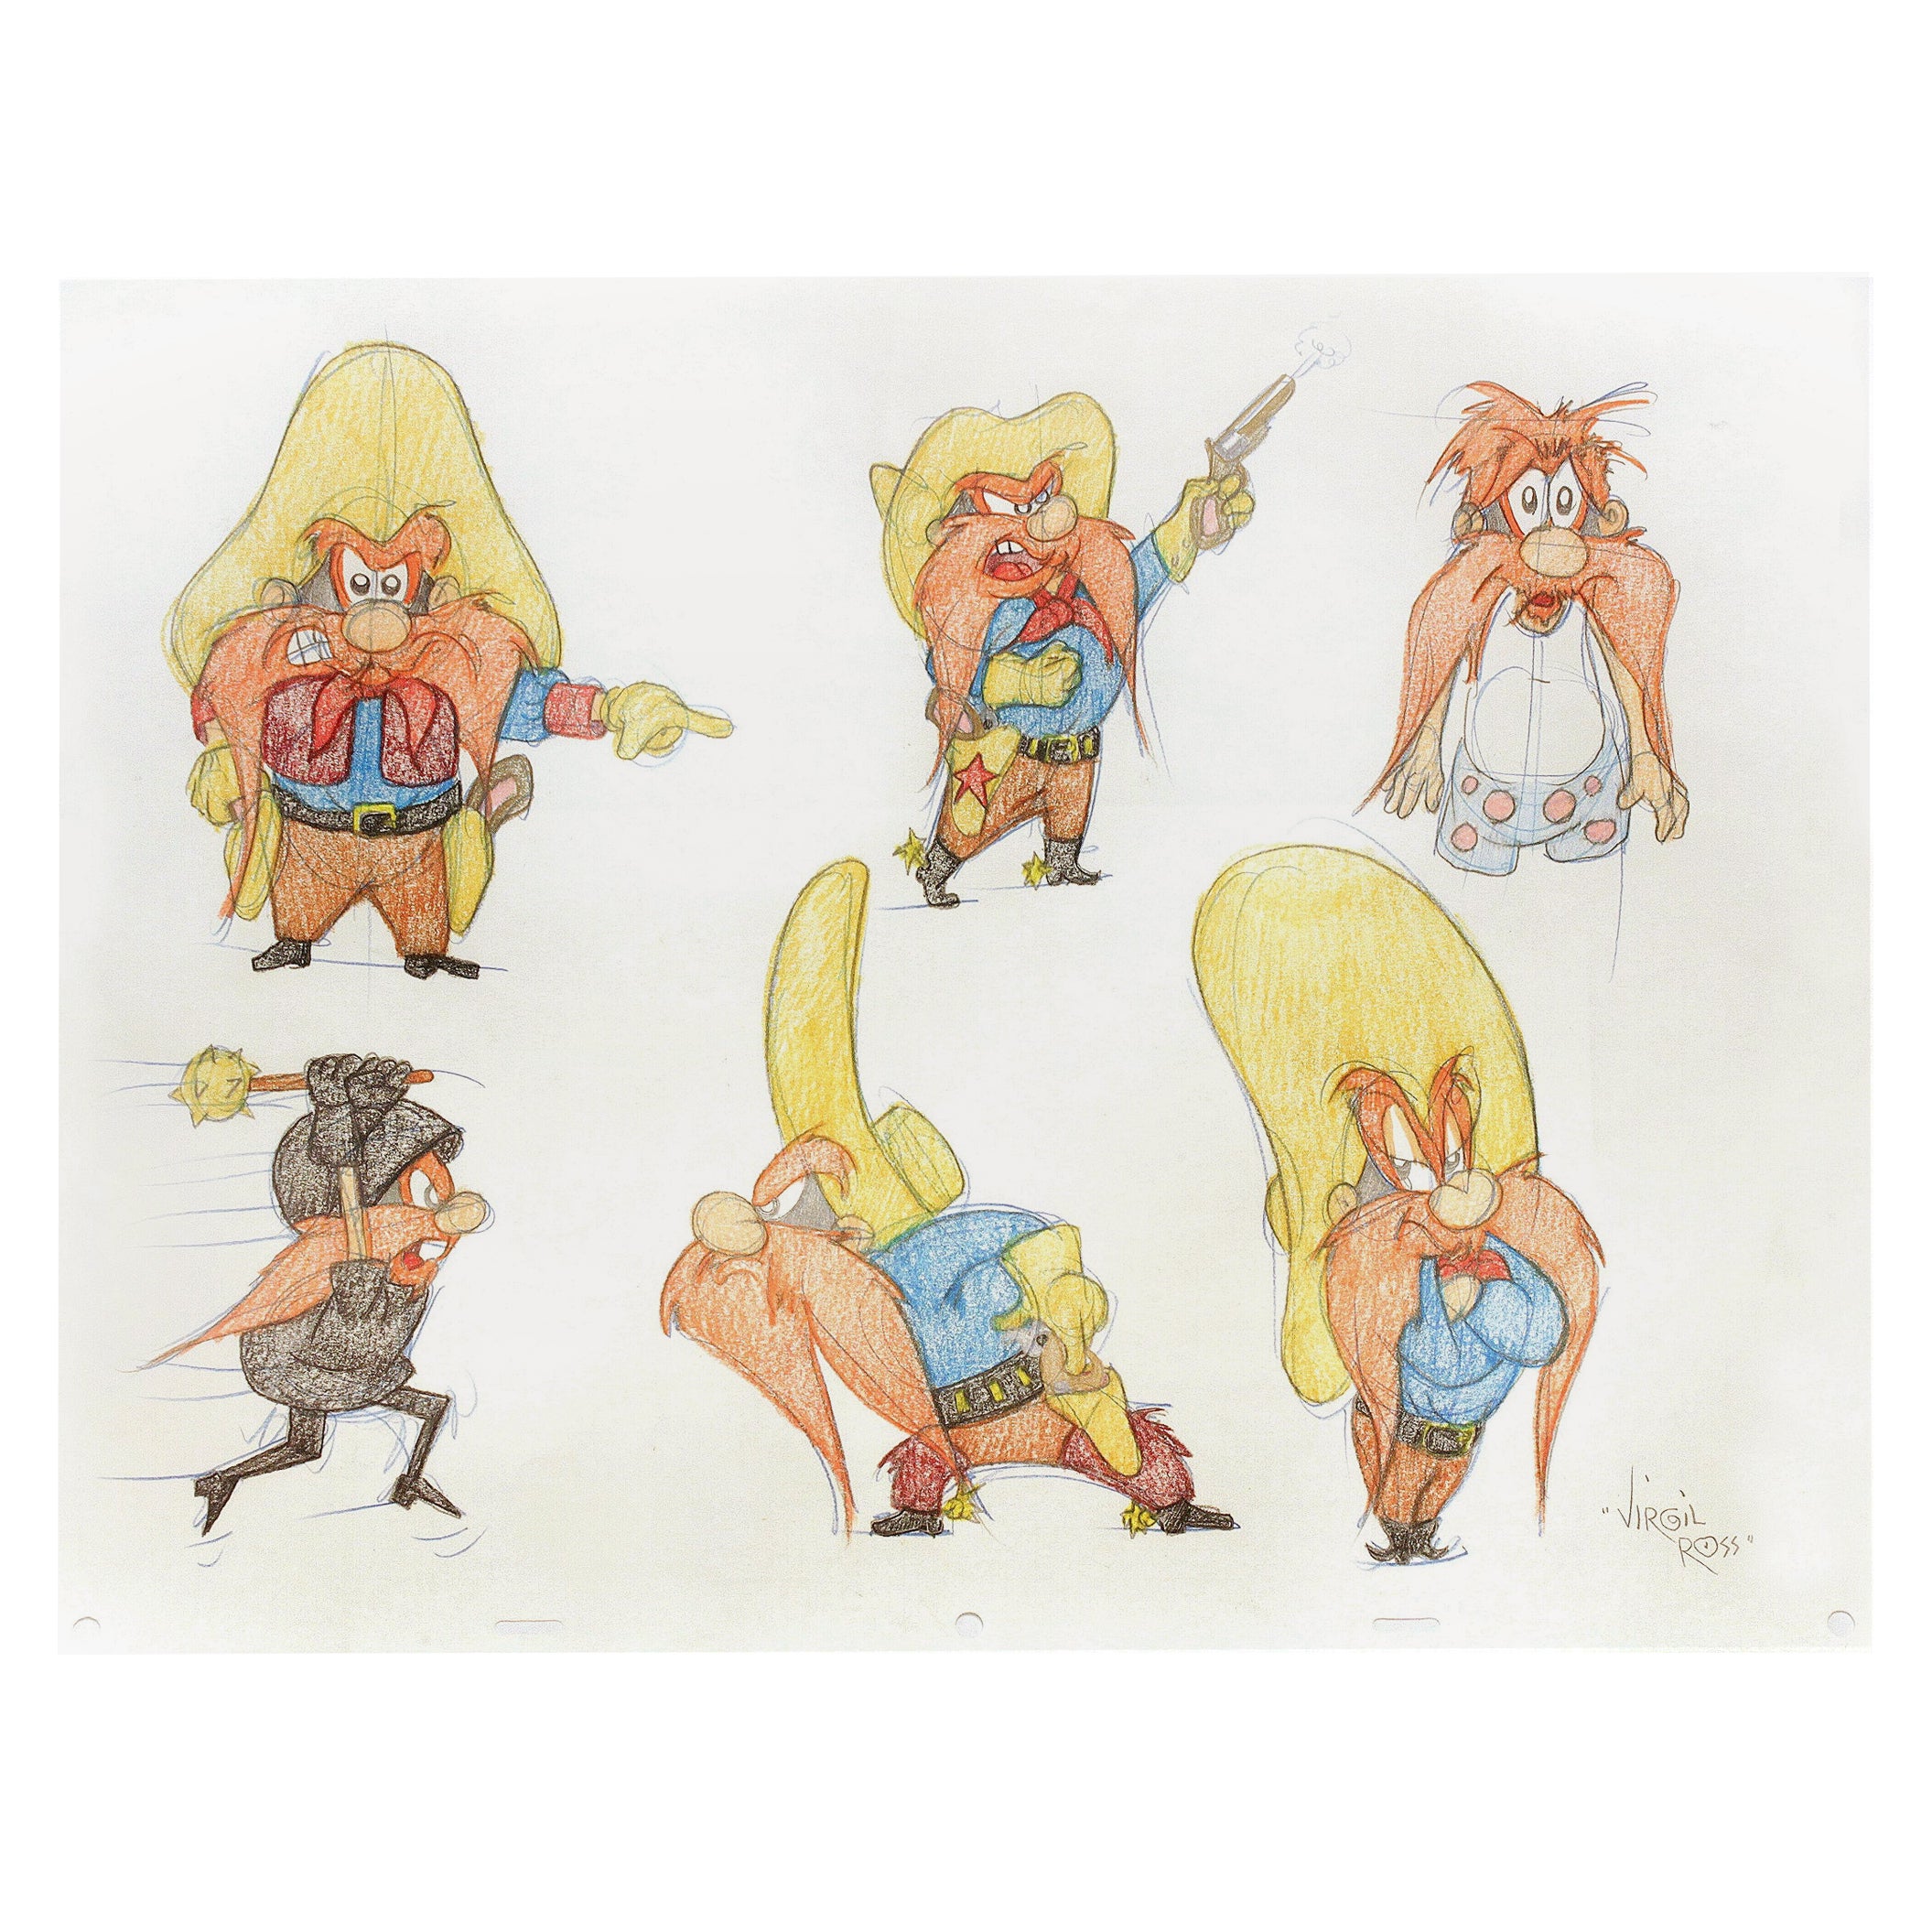 SIX ORIGINAL DRAWINGS OF YOSEMITE SAM - Signed By Virgil Ross For Sale